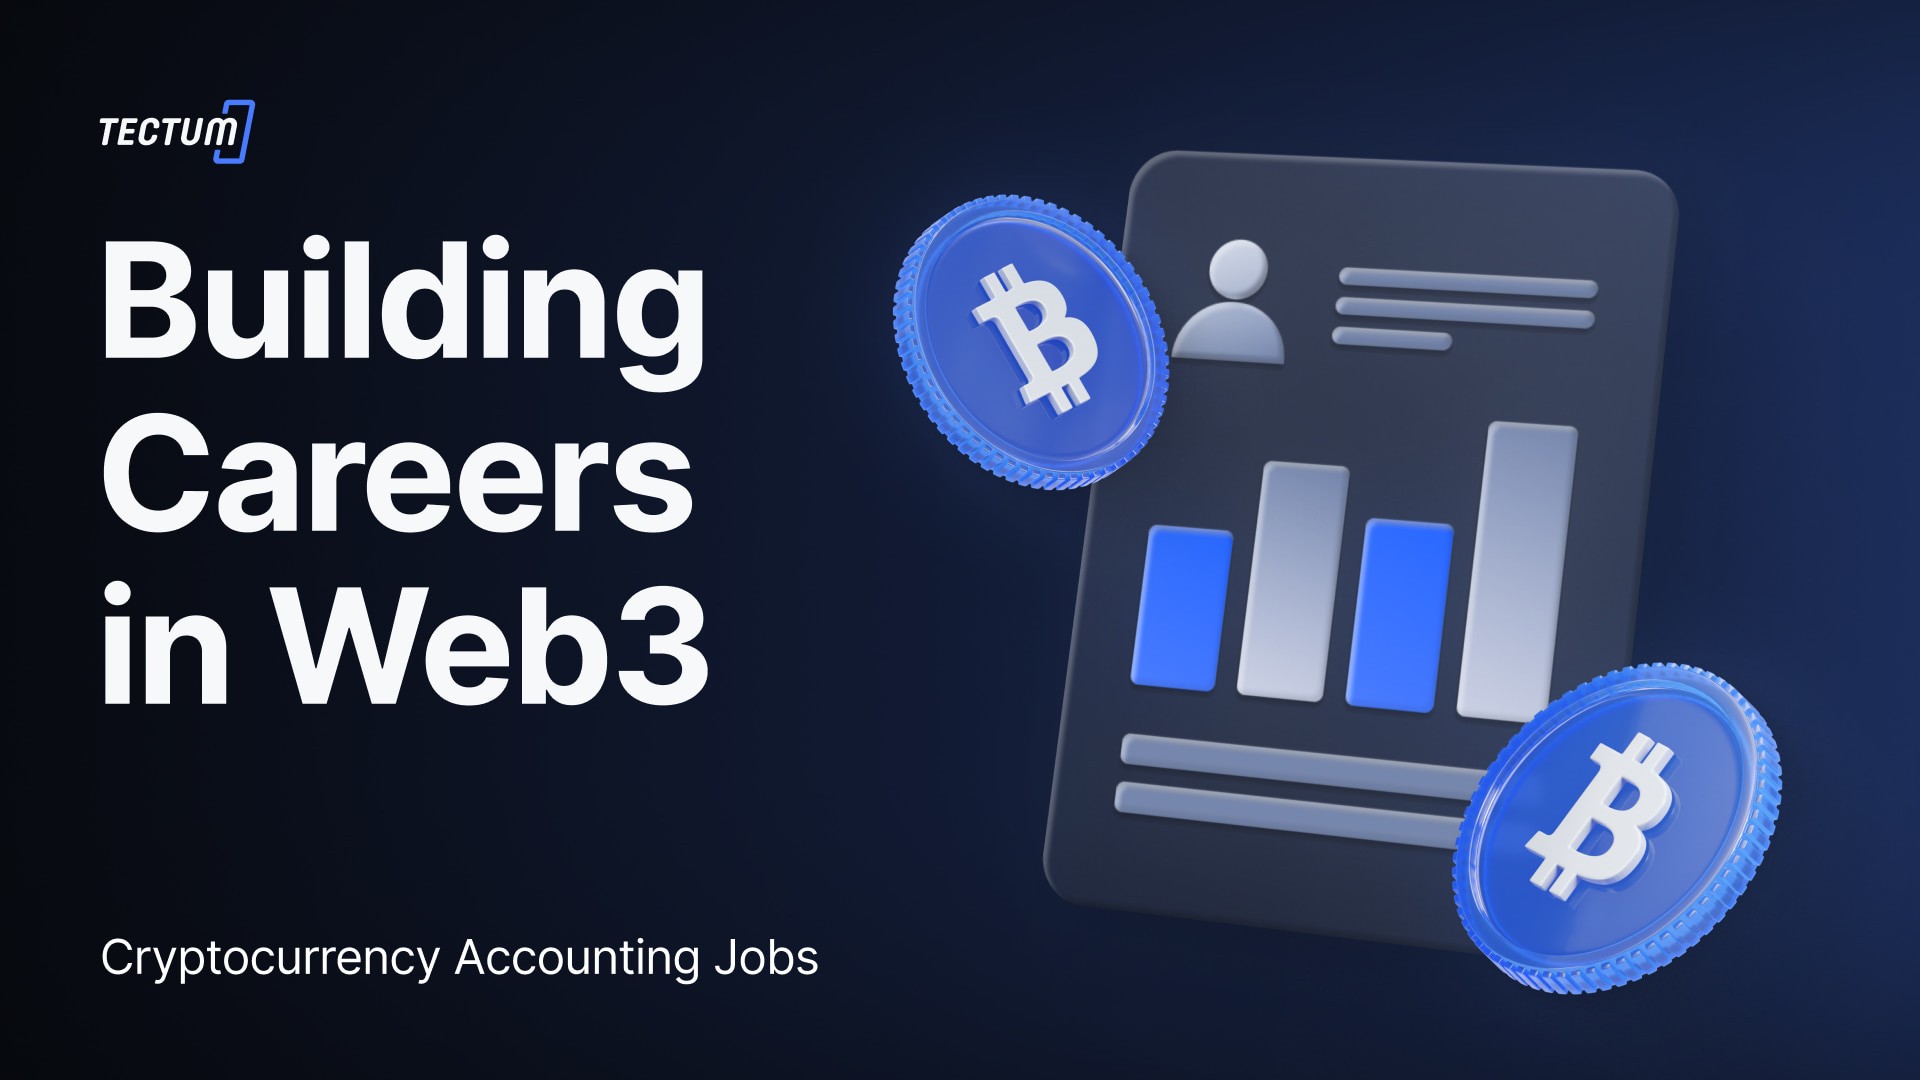 Cryptocurrency Accounting Jobs – Building Careers in Web3